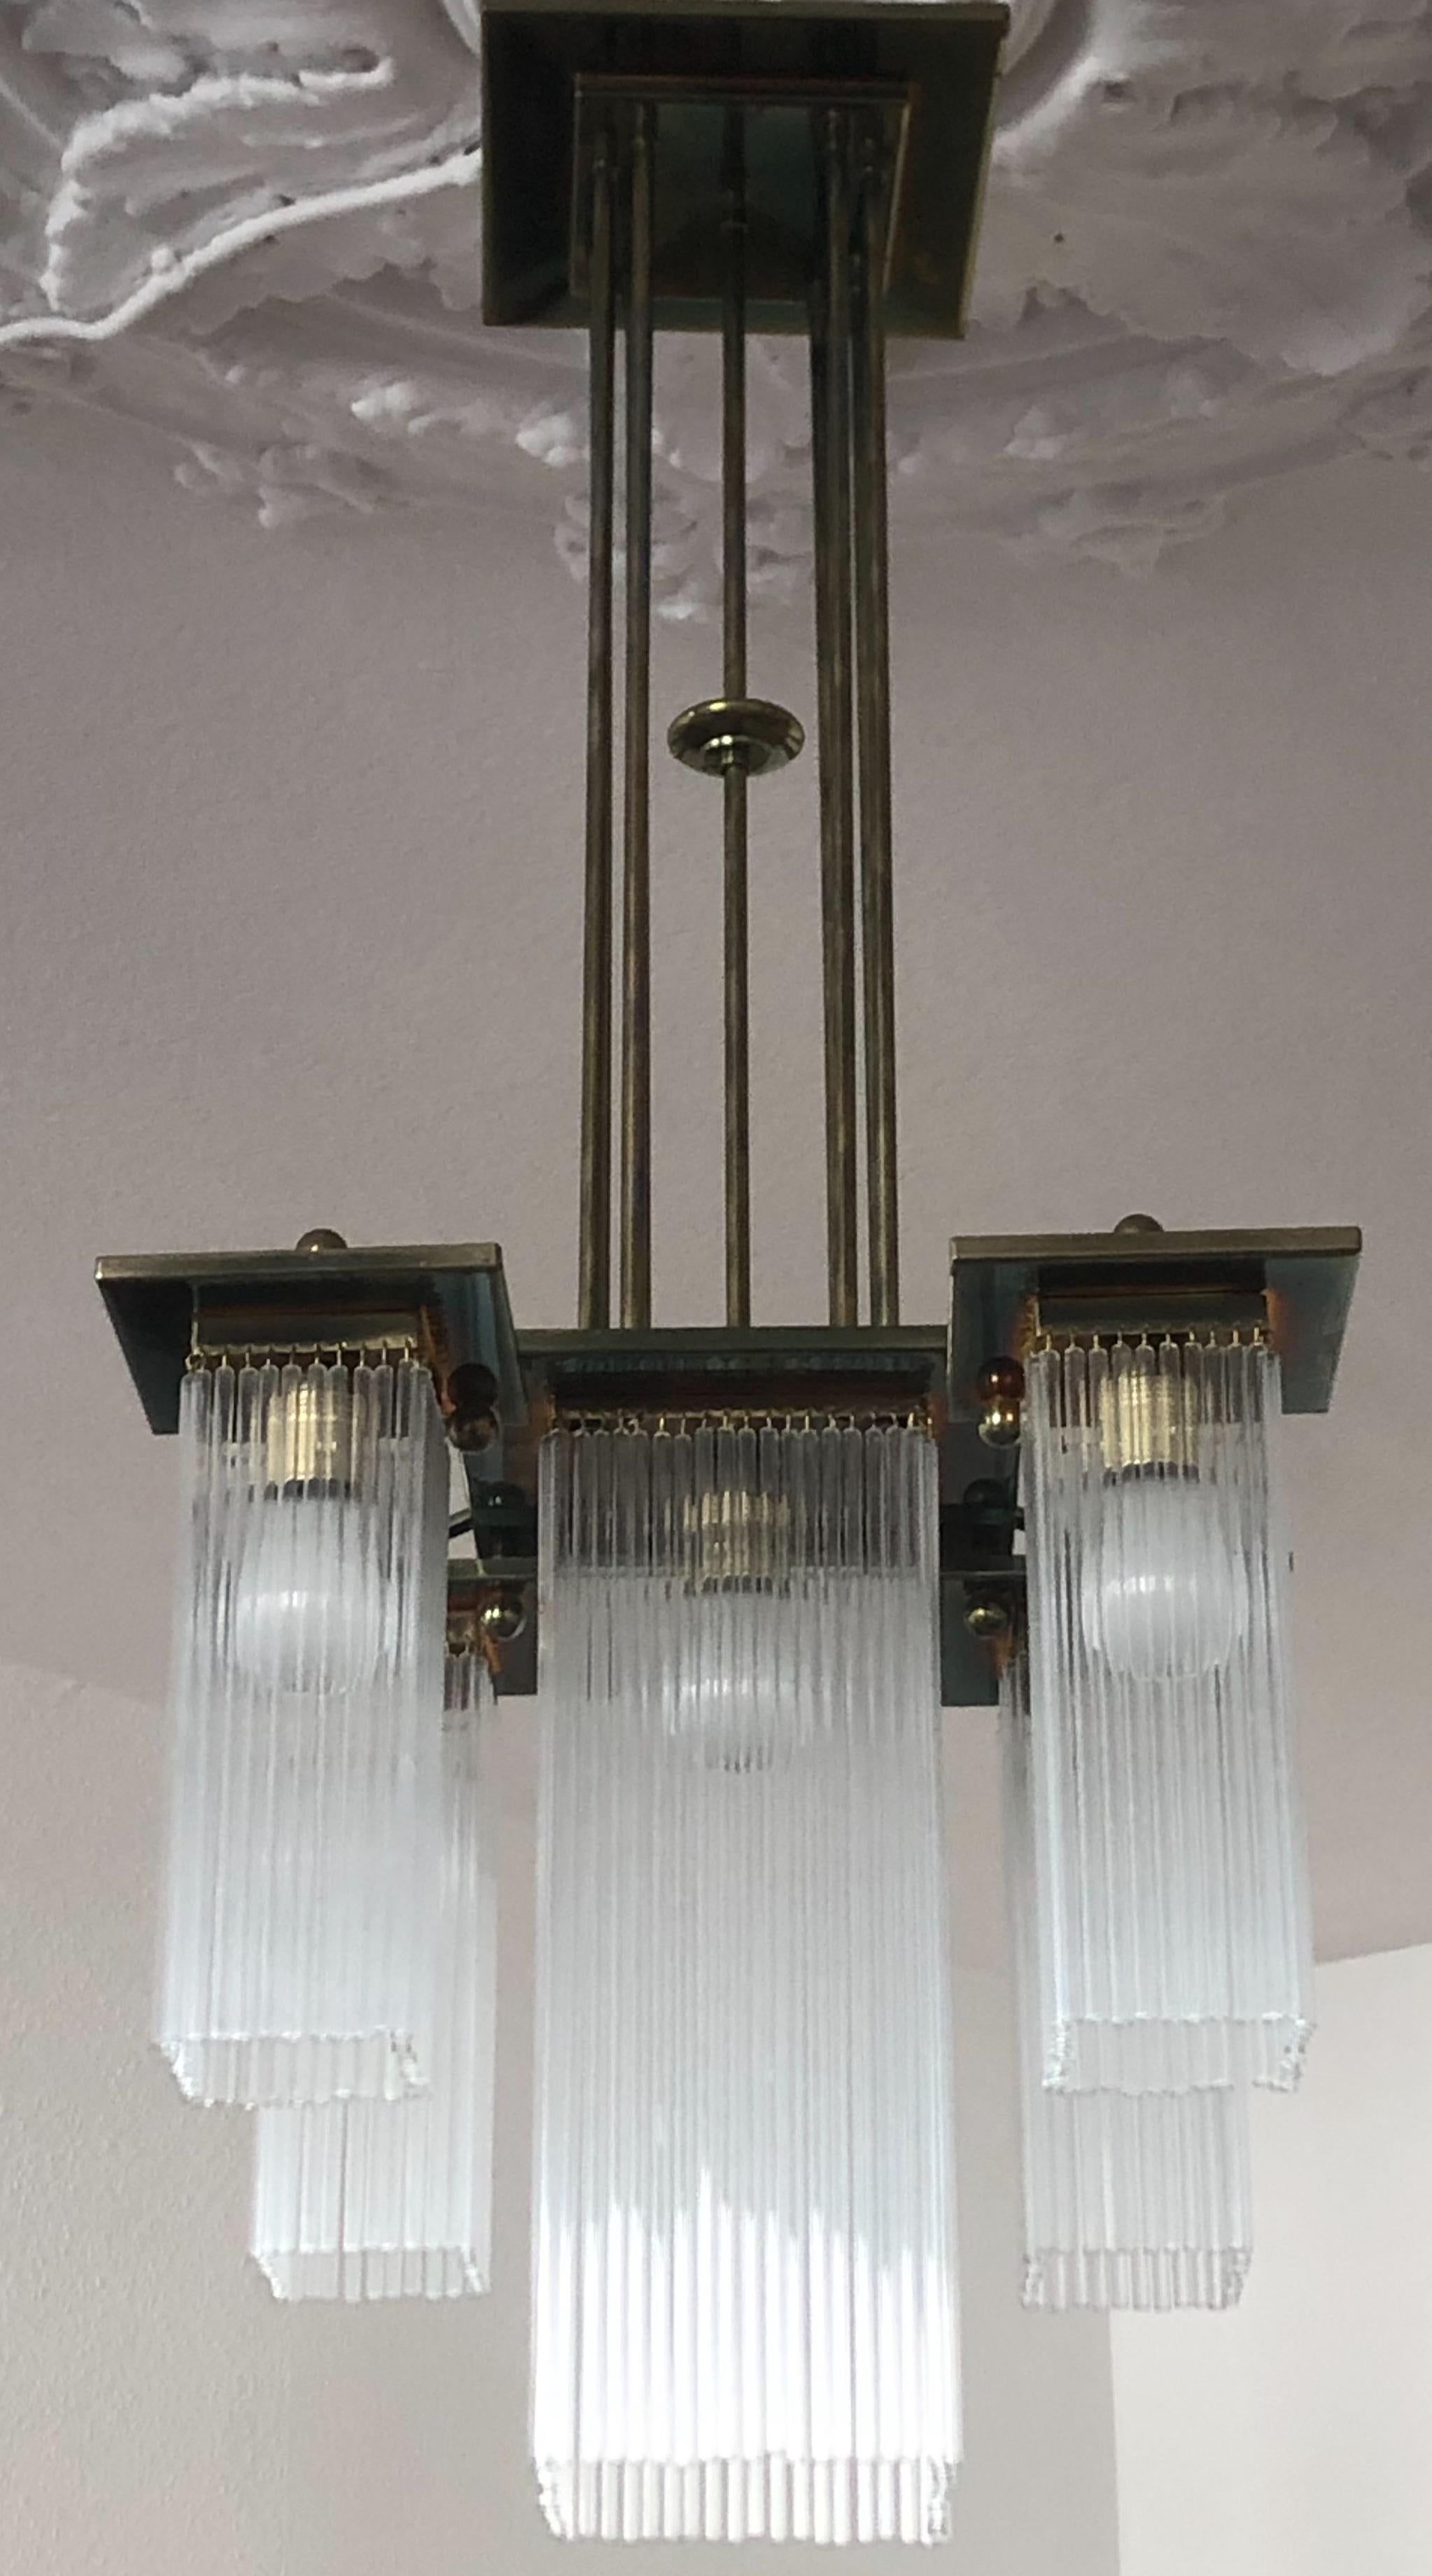 A beautiful and very elegant 5-light brass and glass chandelier in the style of Koloman Moser and Otto Wagner,
circa 1990s, Austria, Vienna.
The chandelier needs E27 standard screw bulbs for illuminate.
Excellent condition.